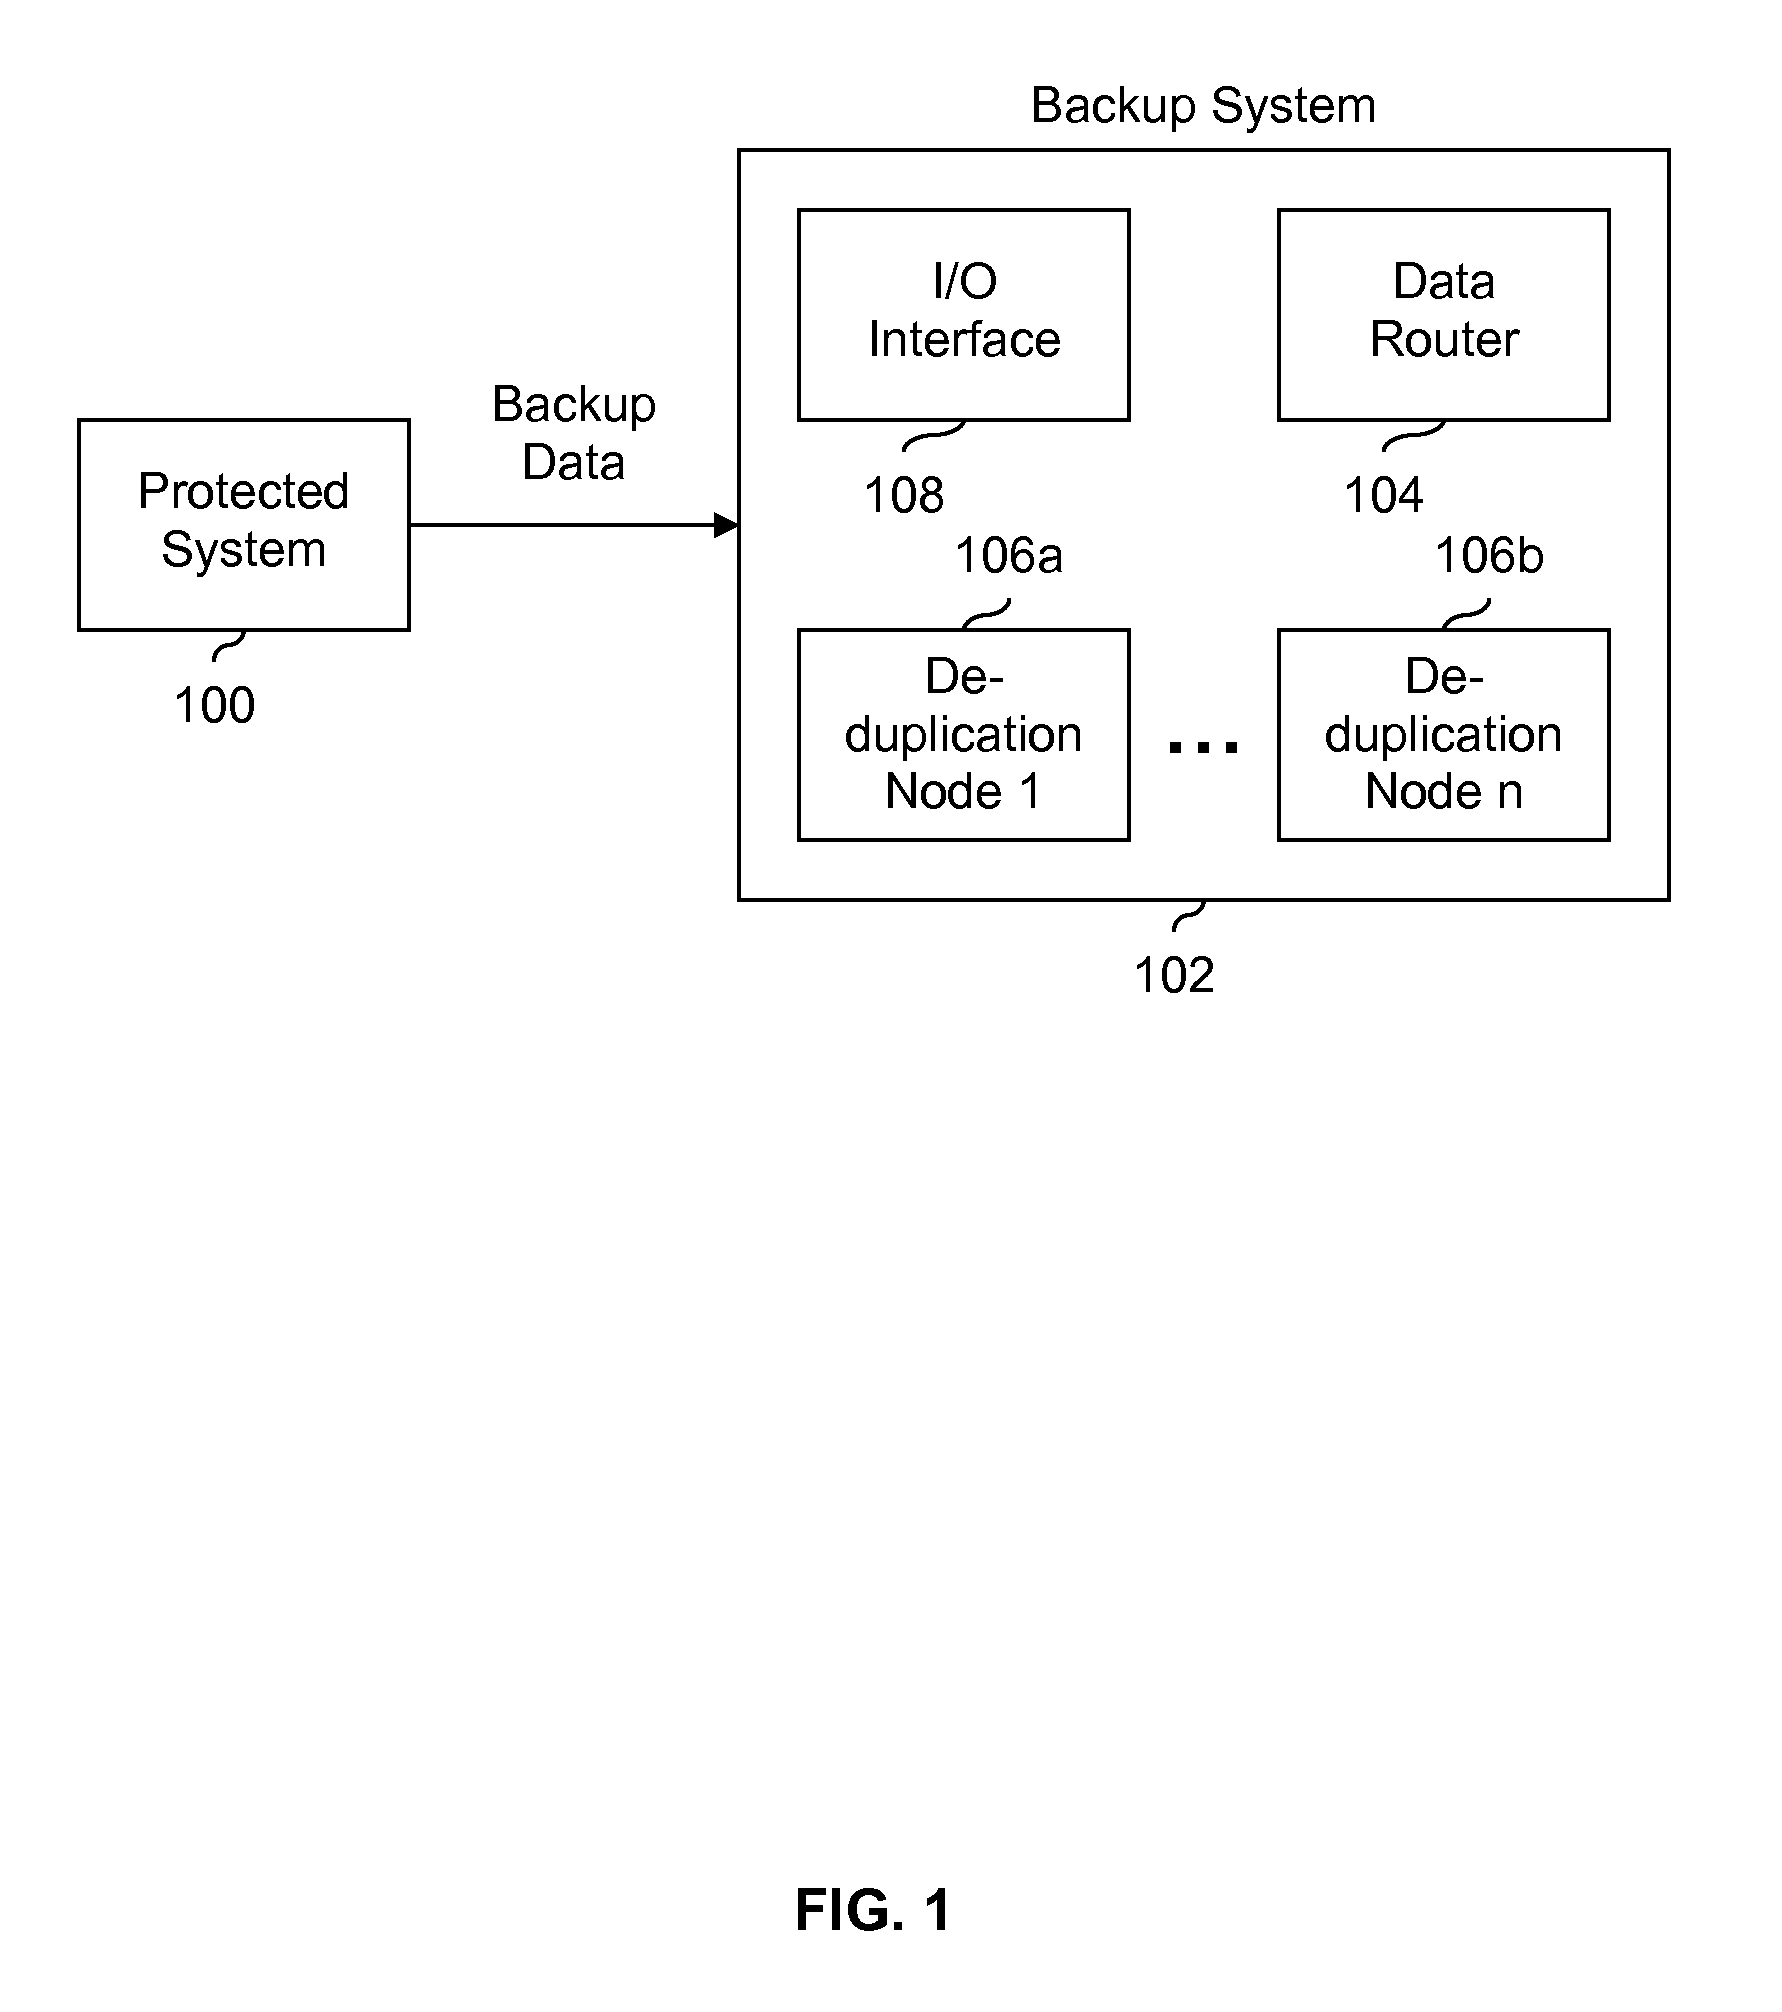 Content-aware distributed deduplicating storage system based on consistent hashing